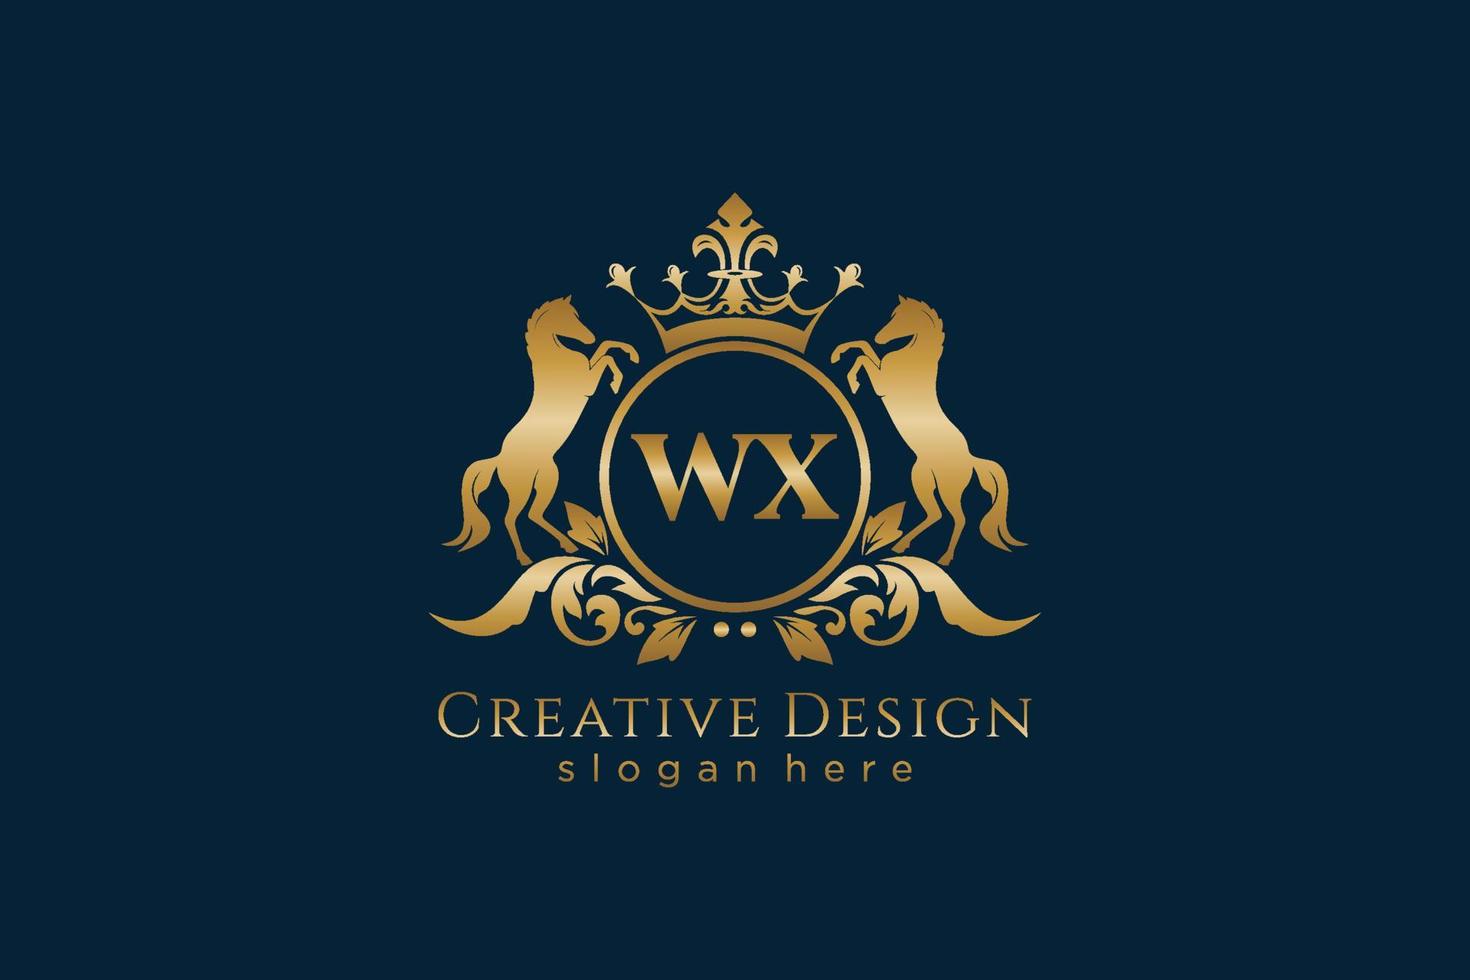 initial WX Retro golden crest with circle and two horses, badge template with scrolls and royal crown - perfect for luxurious branding projects vector